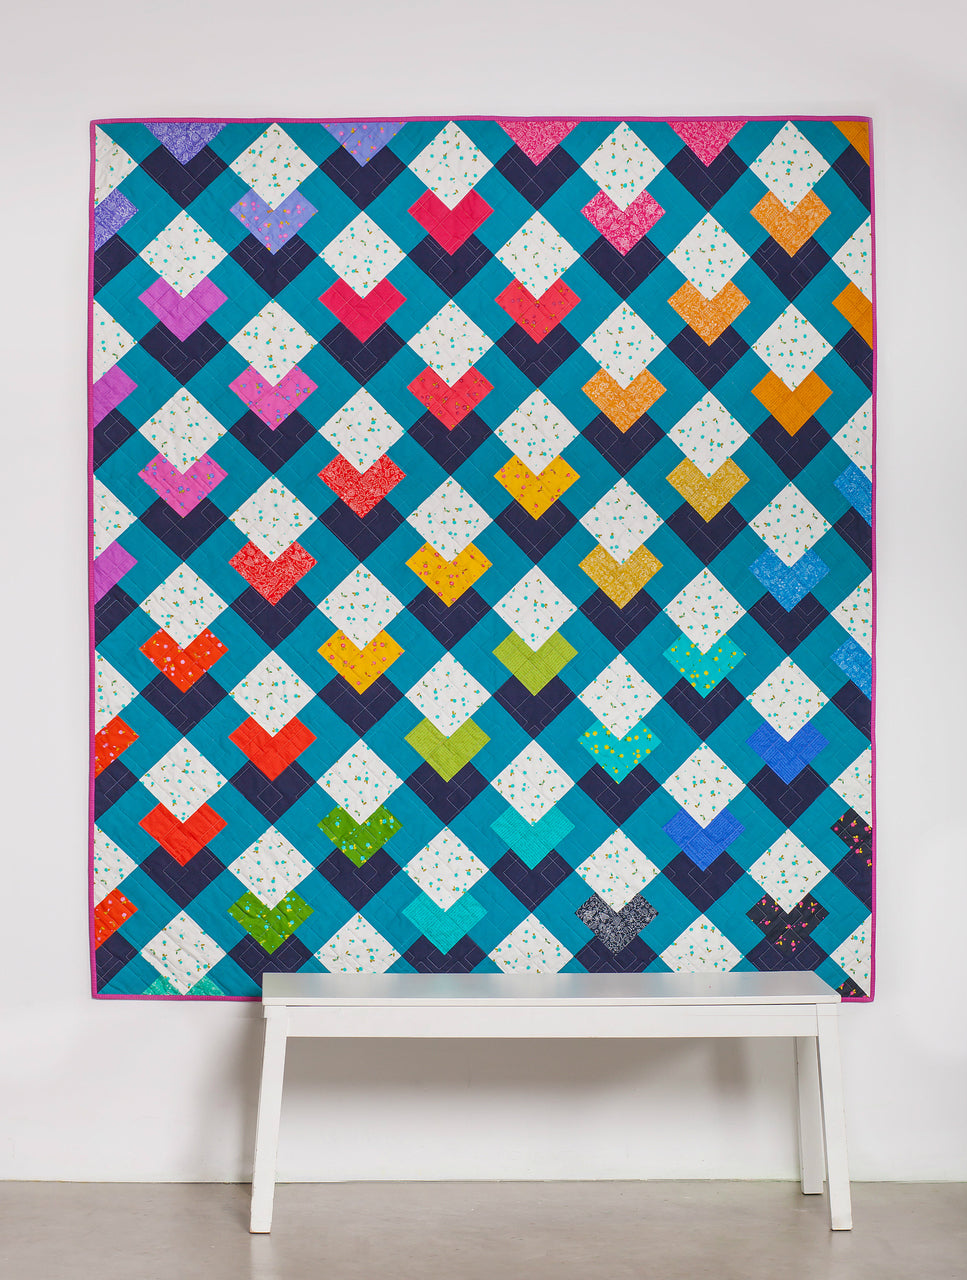 Chain of Hearts Quilt Pattern